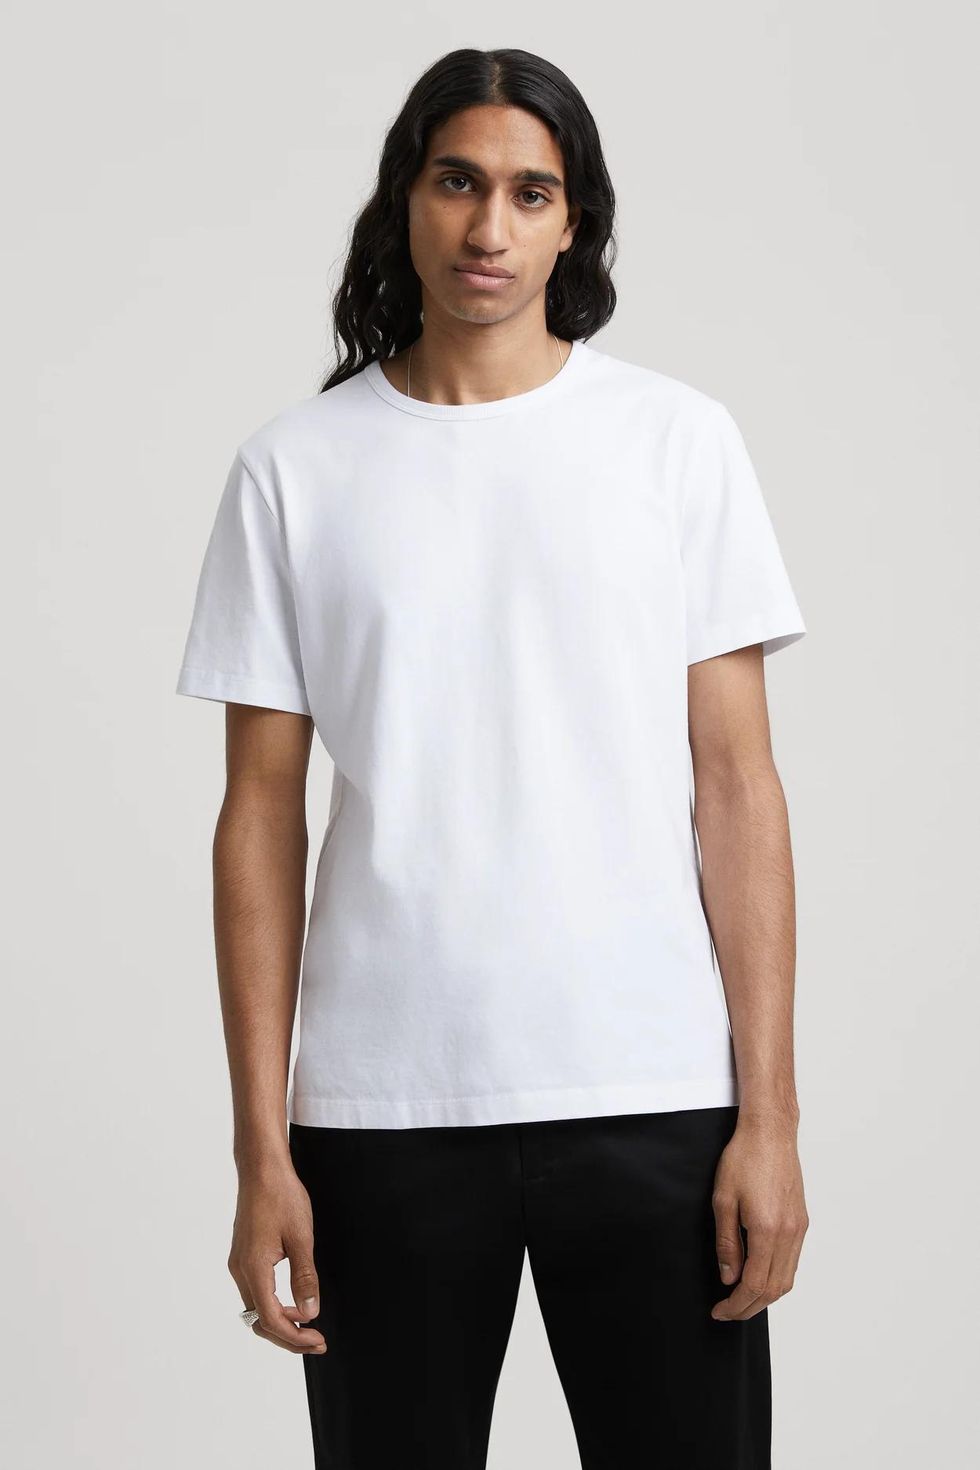 How to Style a Basic White Tee